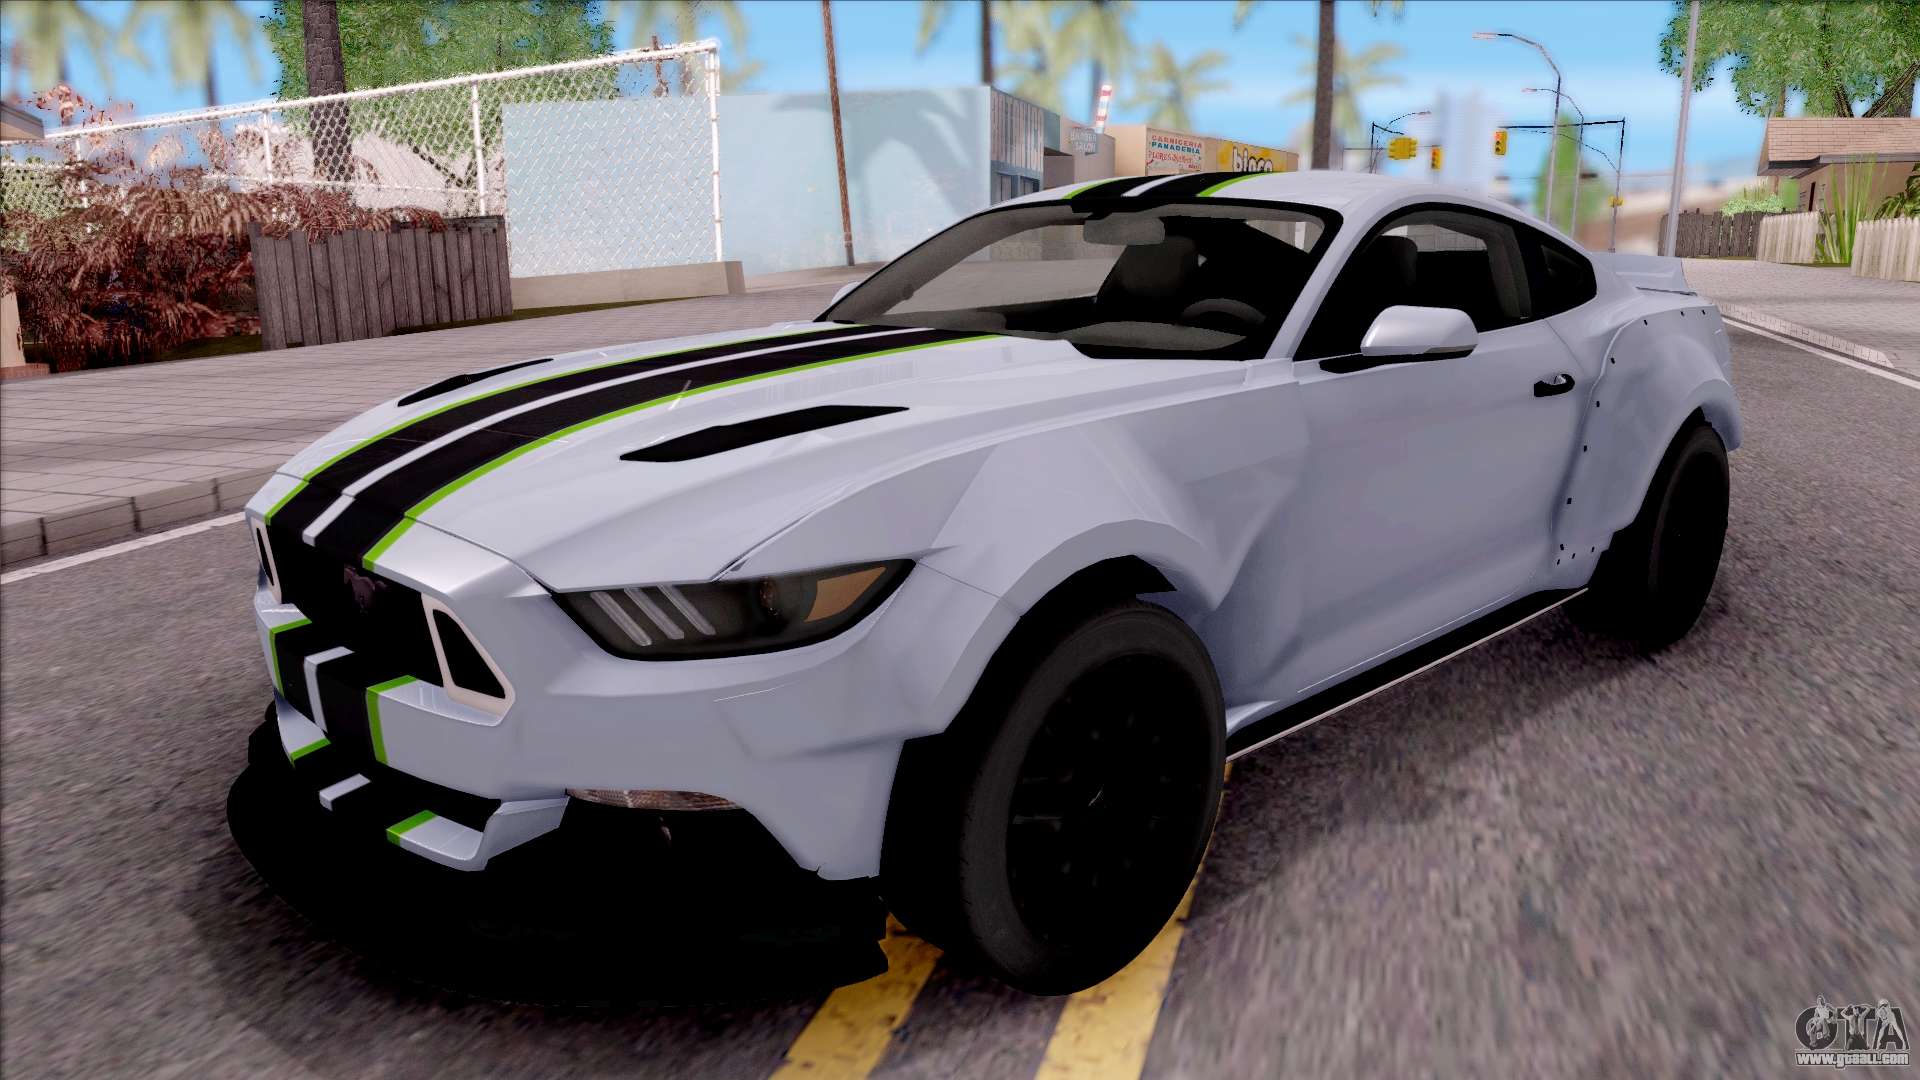 Ford Mustang 15 Need For Speed Payback Edition For Gta San Andreas